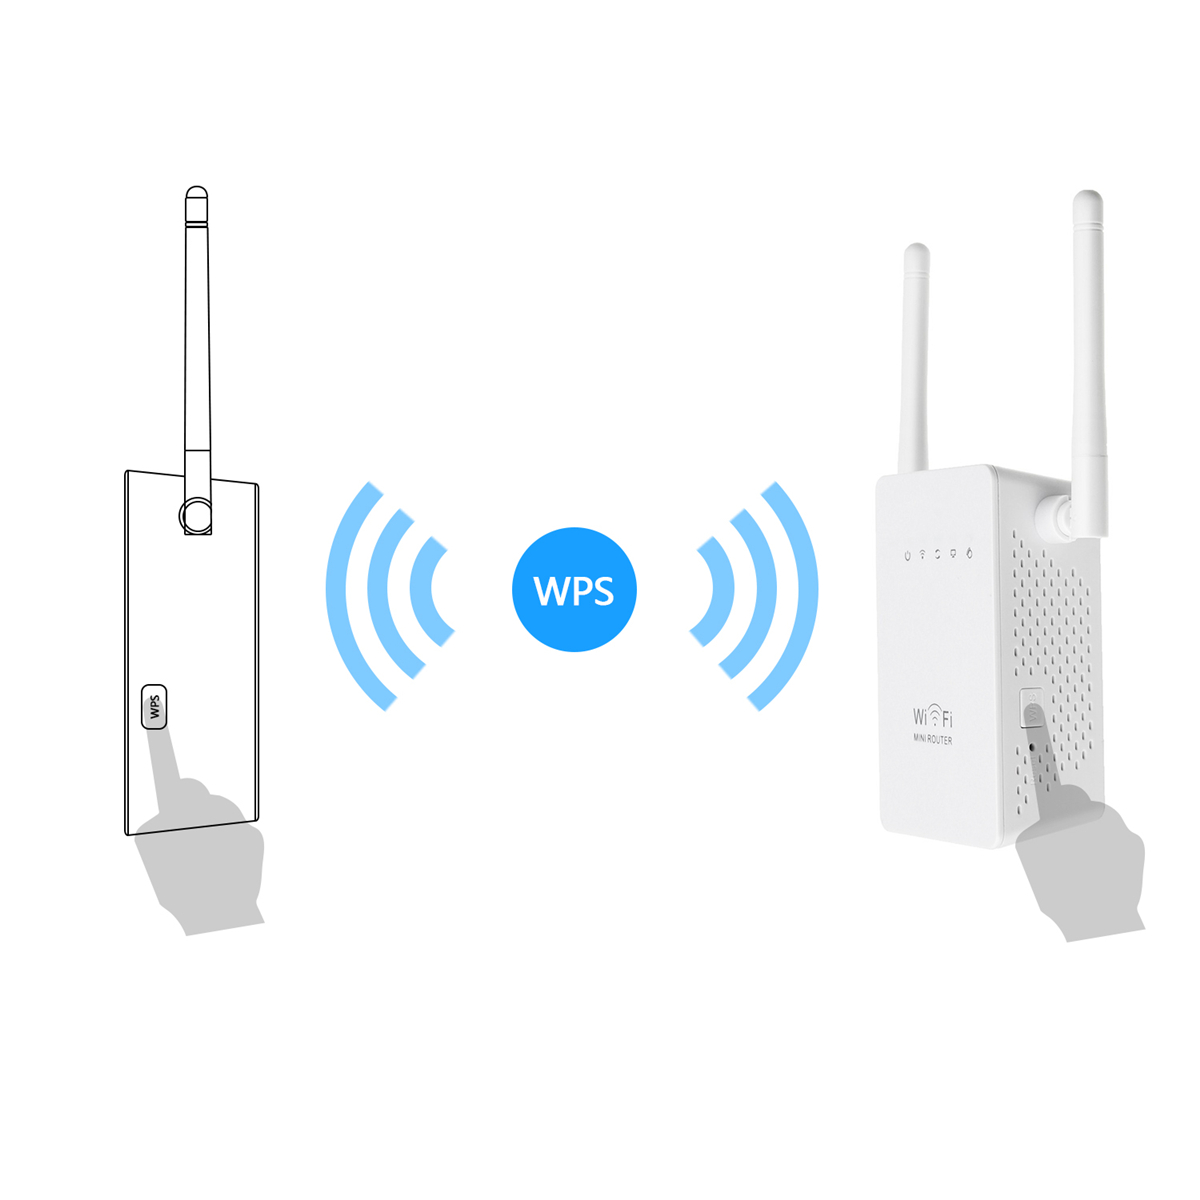 300Mbps-Wireless-Wifi-Range-Repeater-Booster-80211-Dual-Antennas-Wireless-AP-Router-with-LAN-WAN-Por-1257437-8